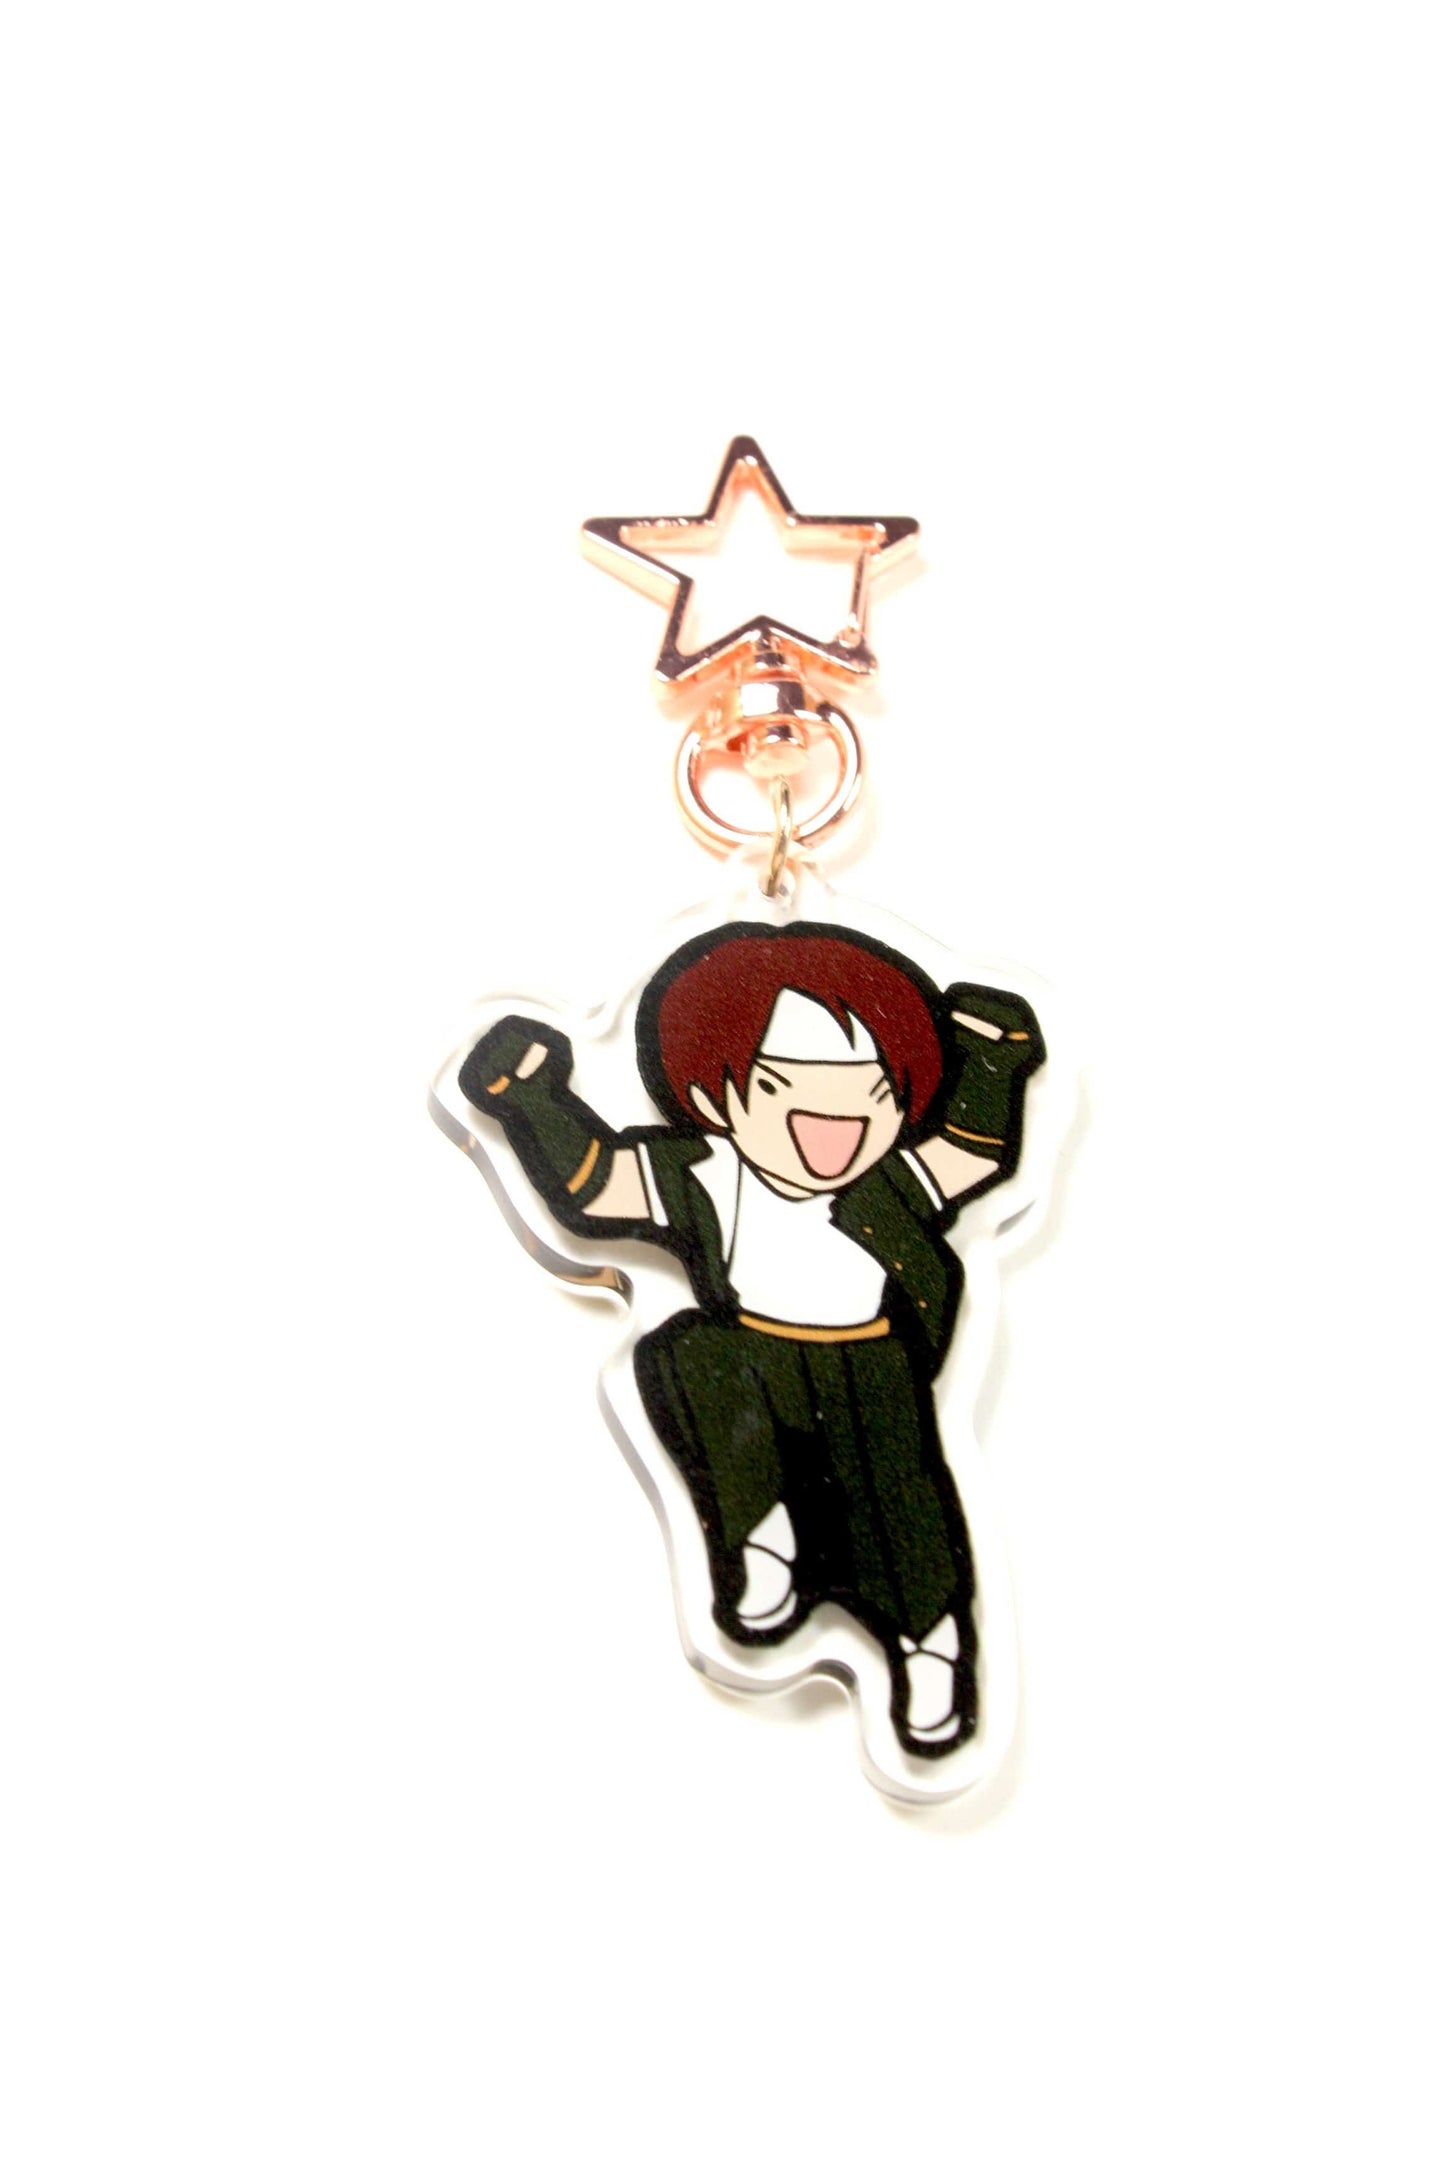 Kyo '94 Keychain (Outdated Design)